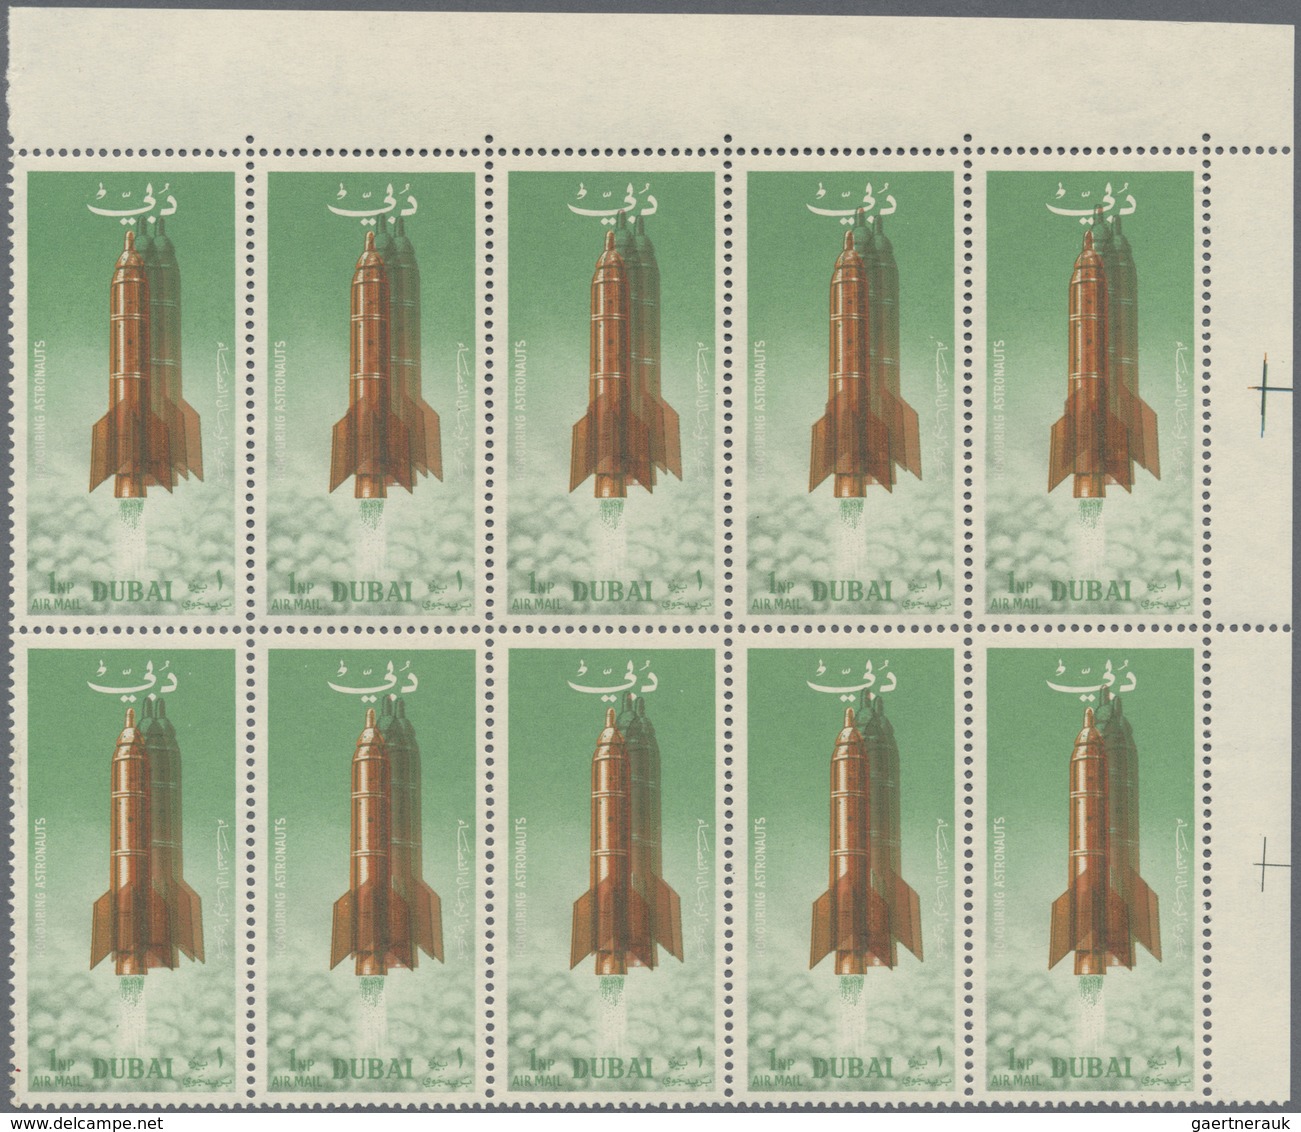 ** Dubai: 1964, Space Travel 1np. 'Rocket Taking Off' With TRIPLE PRINT Of ROCKET In A Perf. Block Of 1 - Dubai